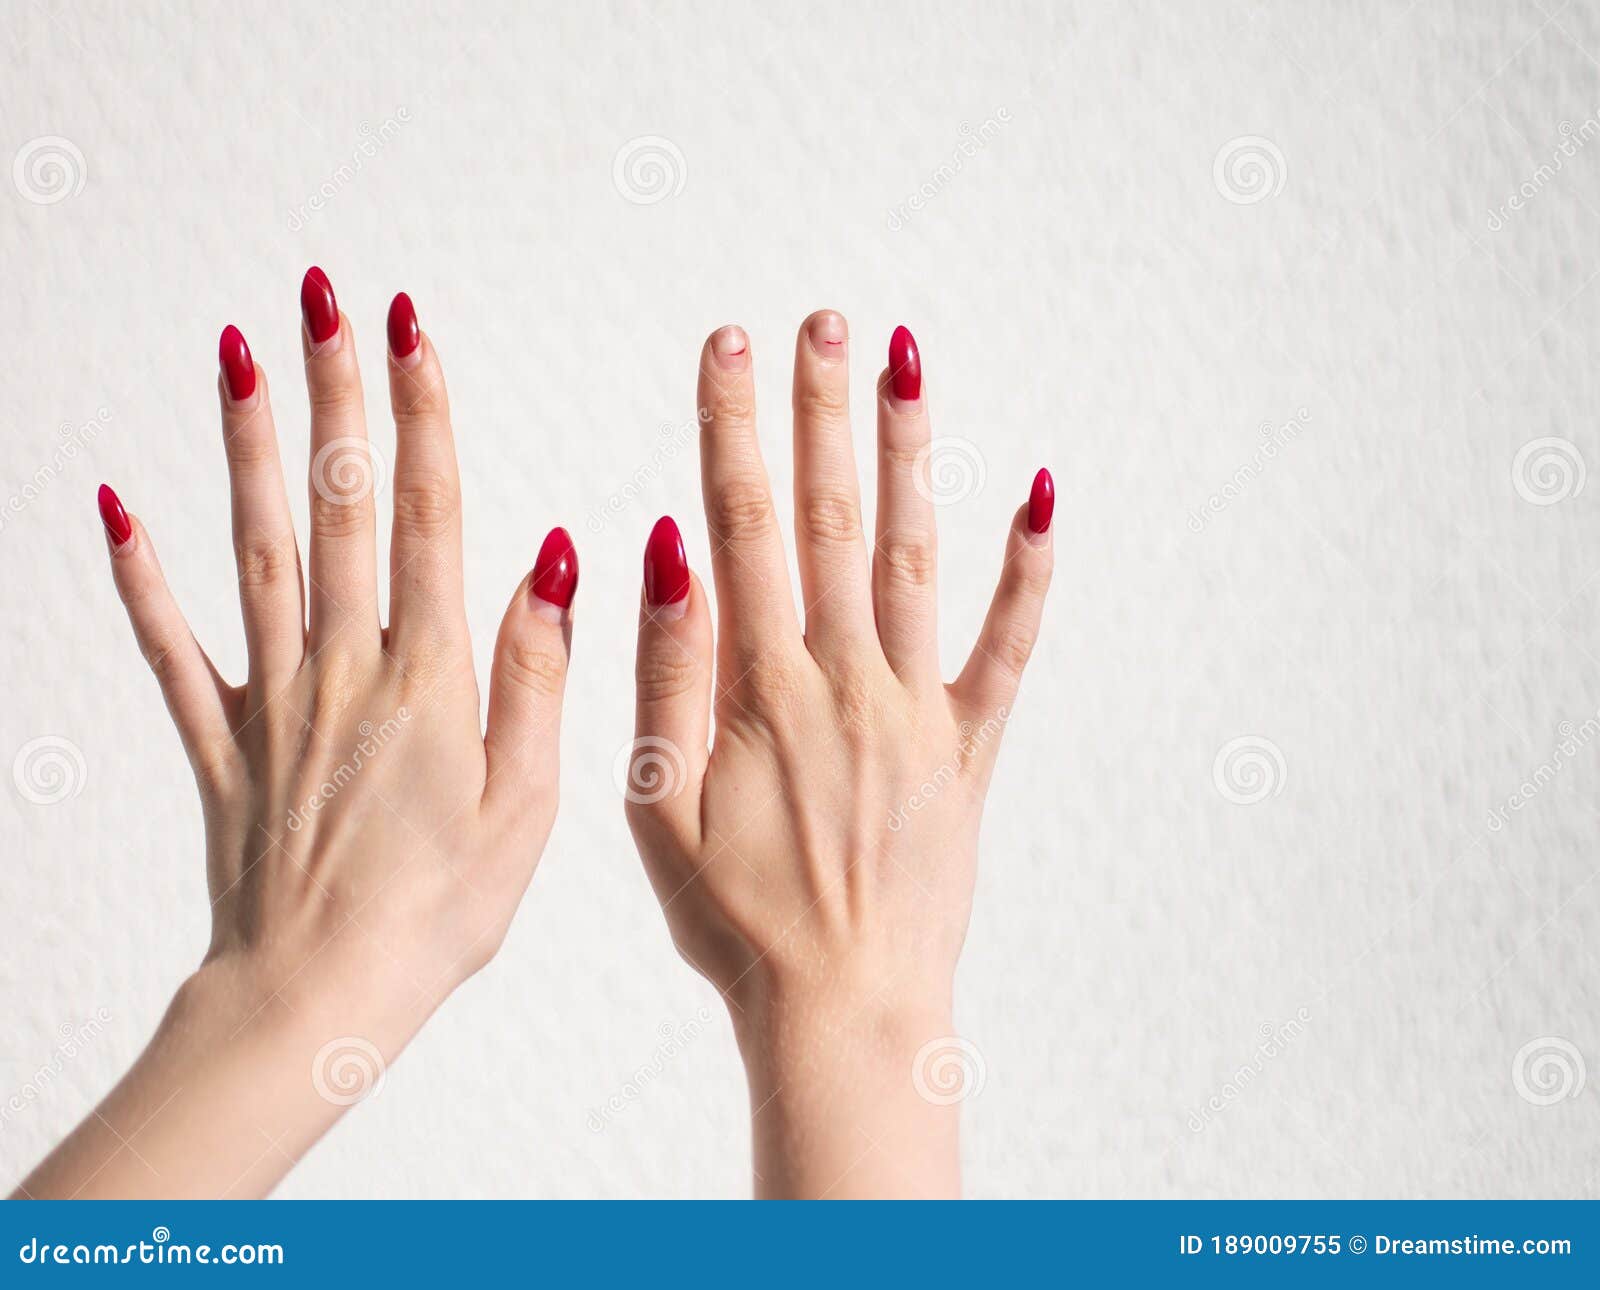 A Young Girl Had Red Manicured Nails On Two Of Her Hands And Two Of Her